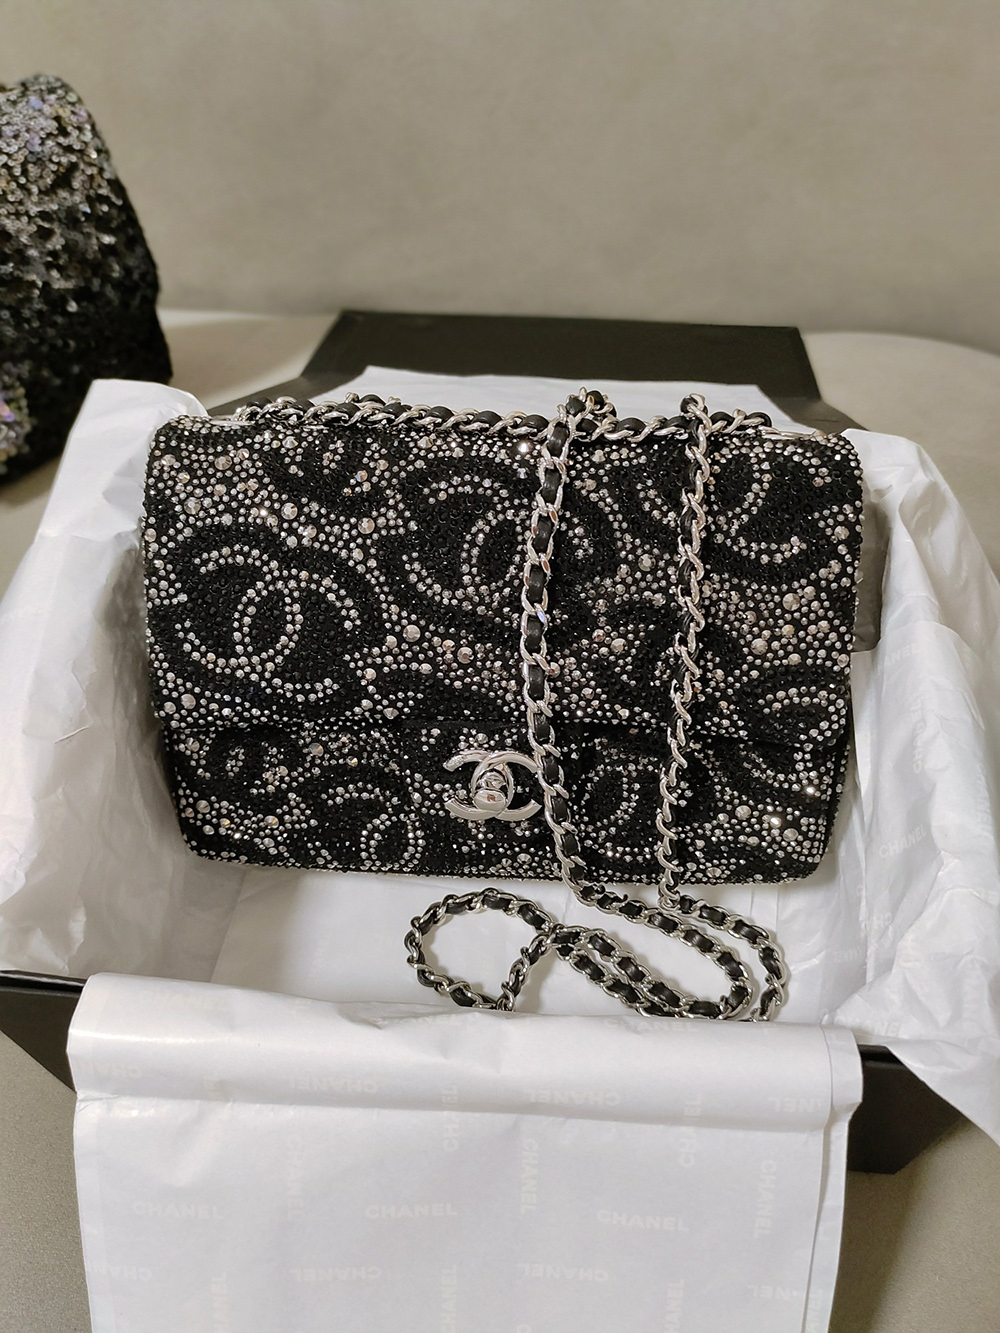 Chanel Bags A6568